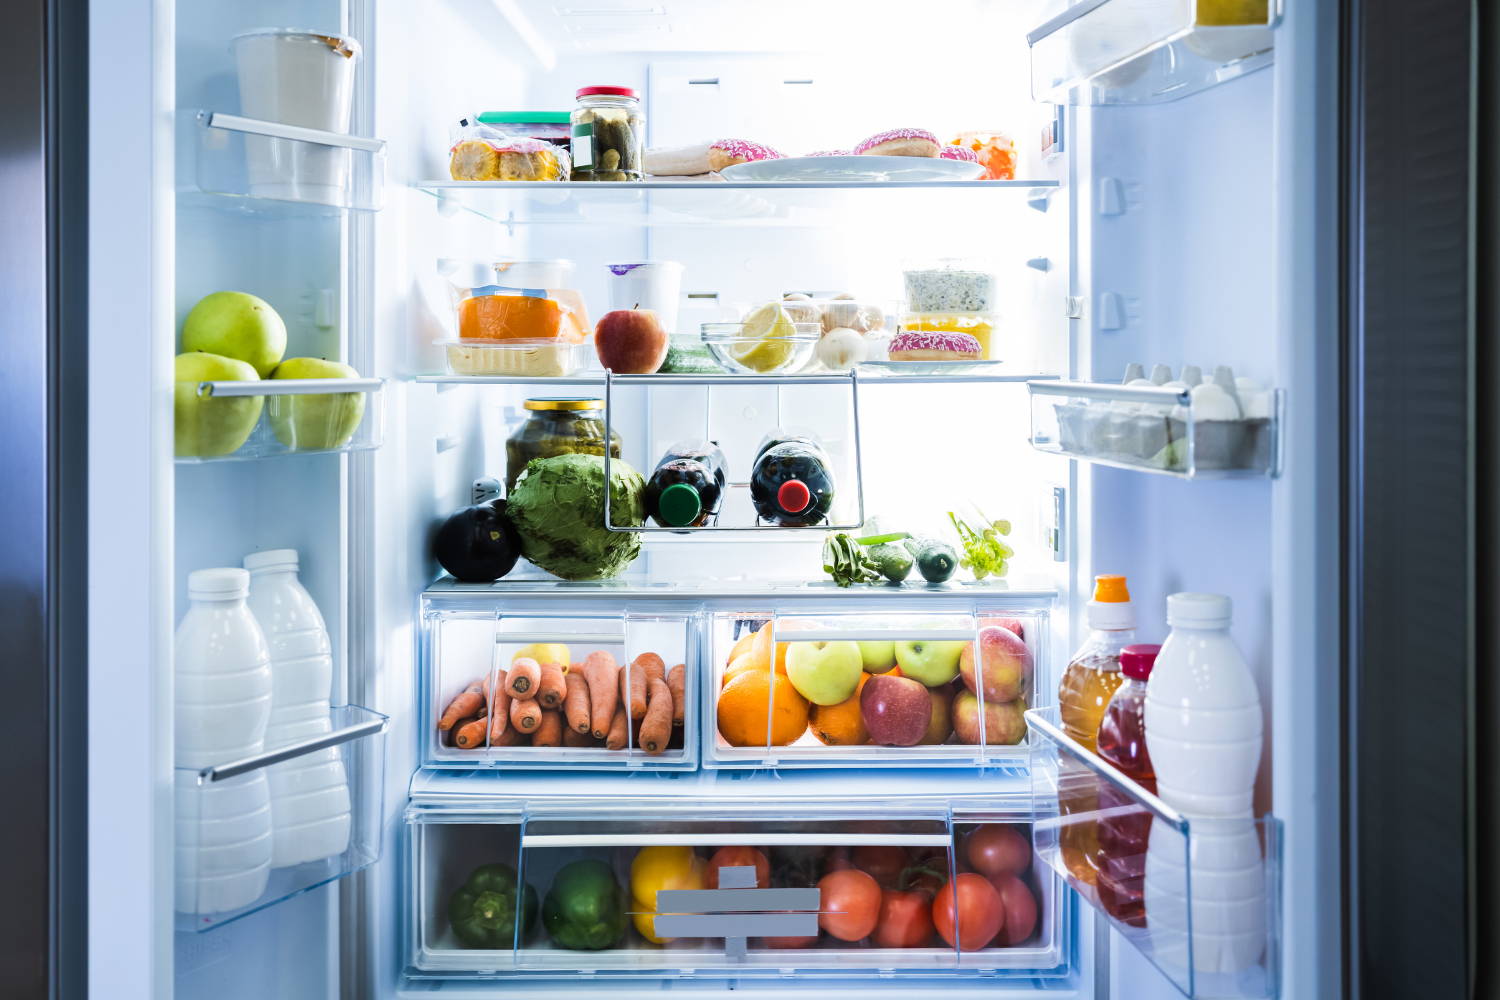 inside a fridge, freah fruit and vegetables and groceries